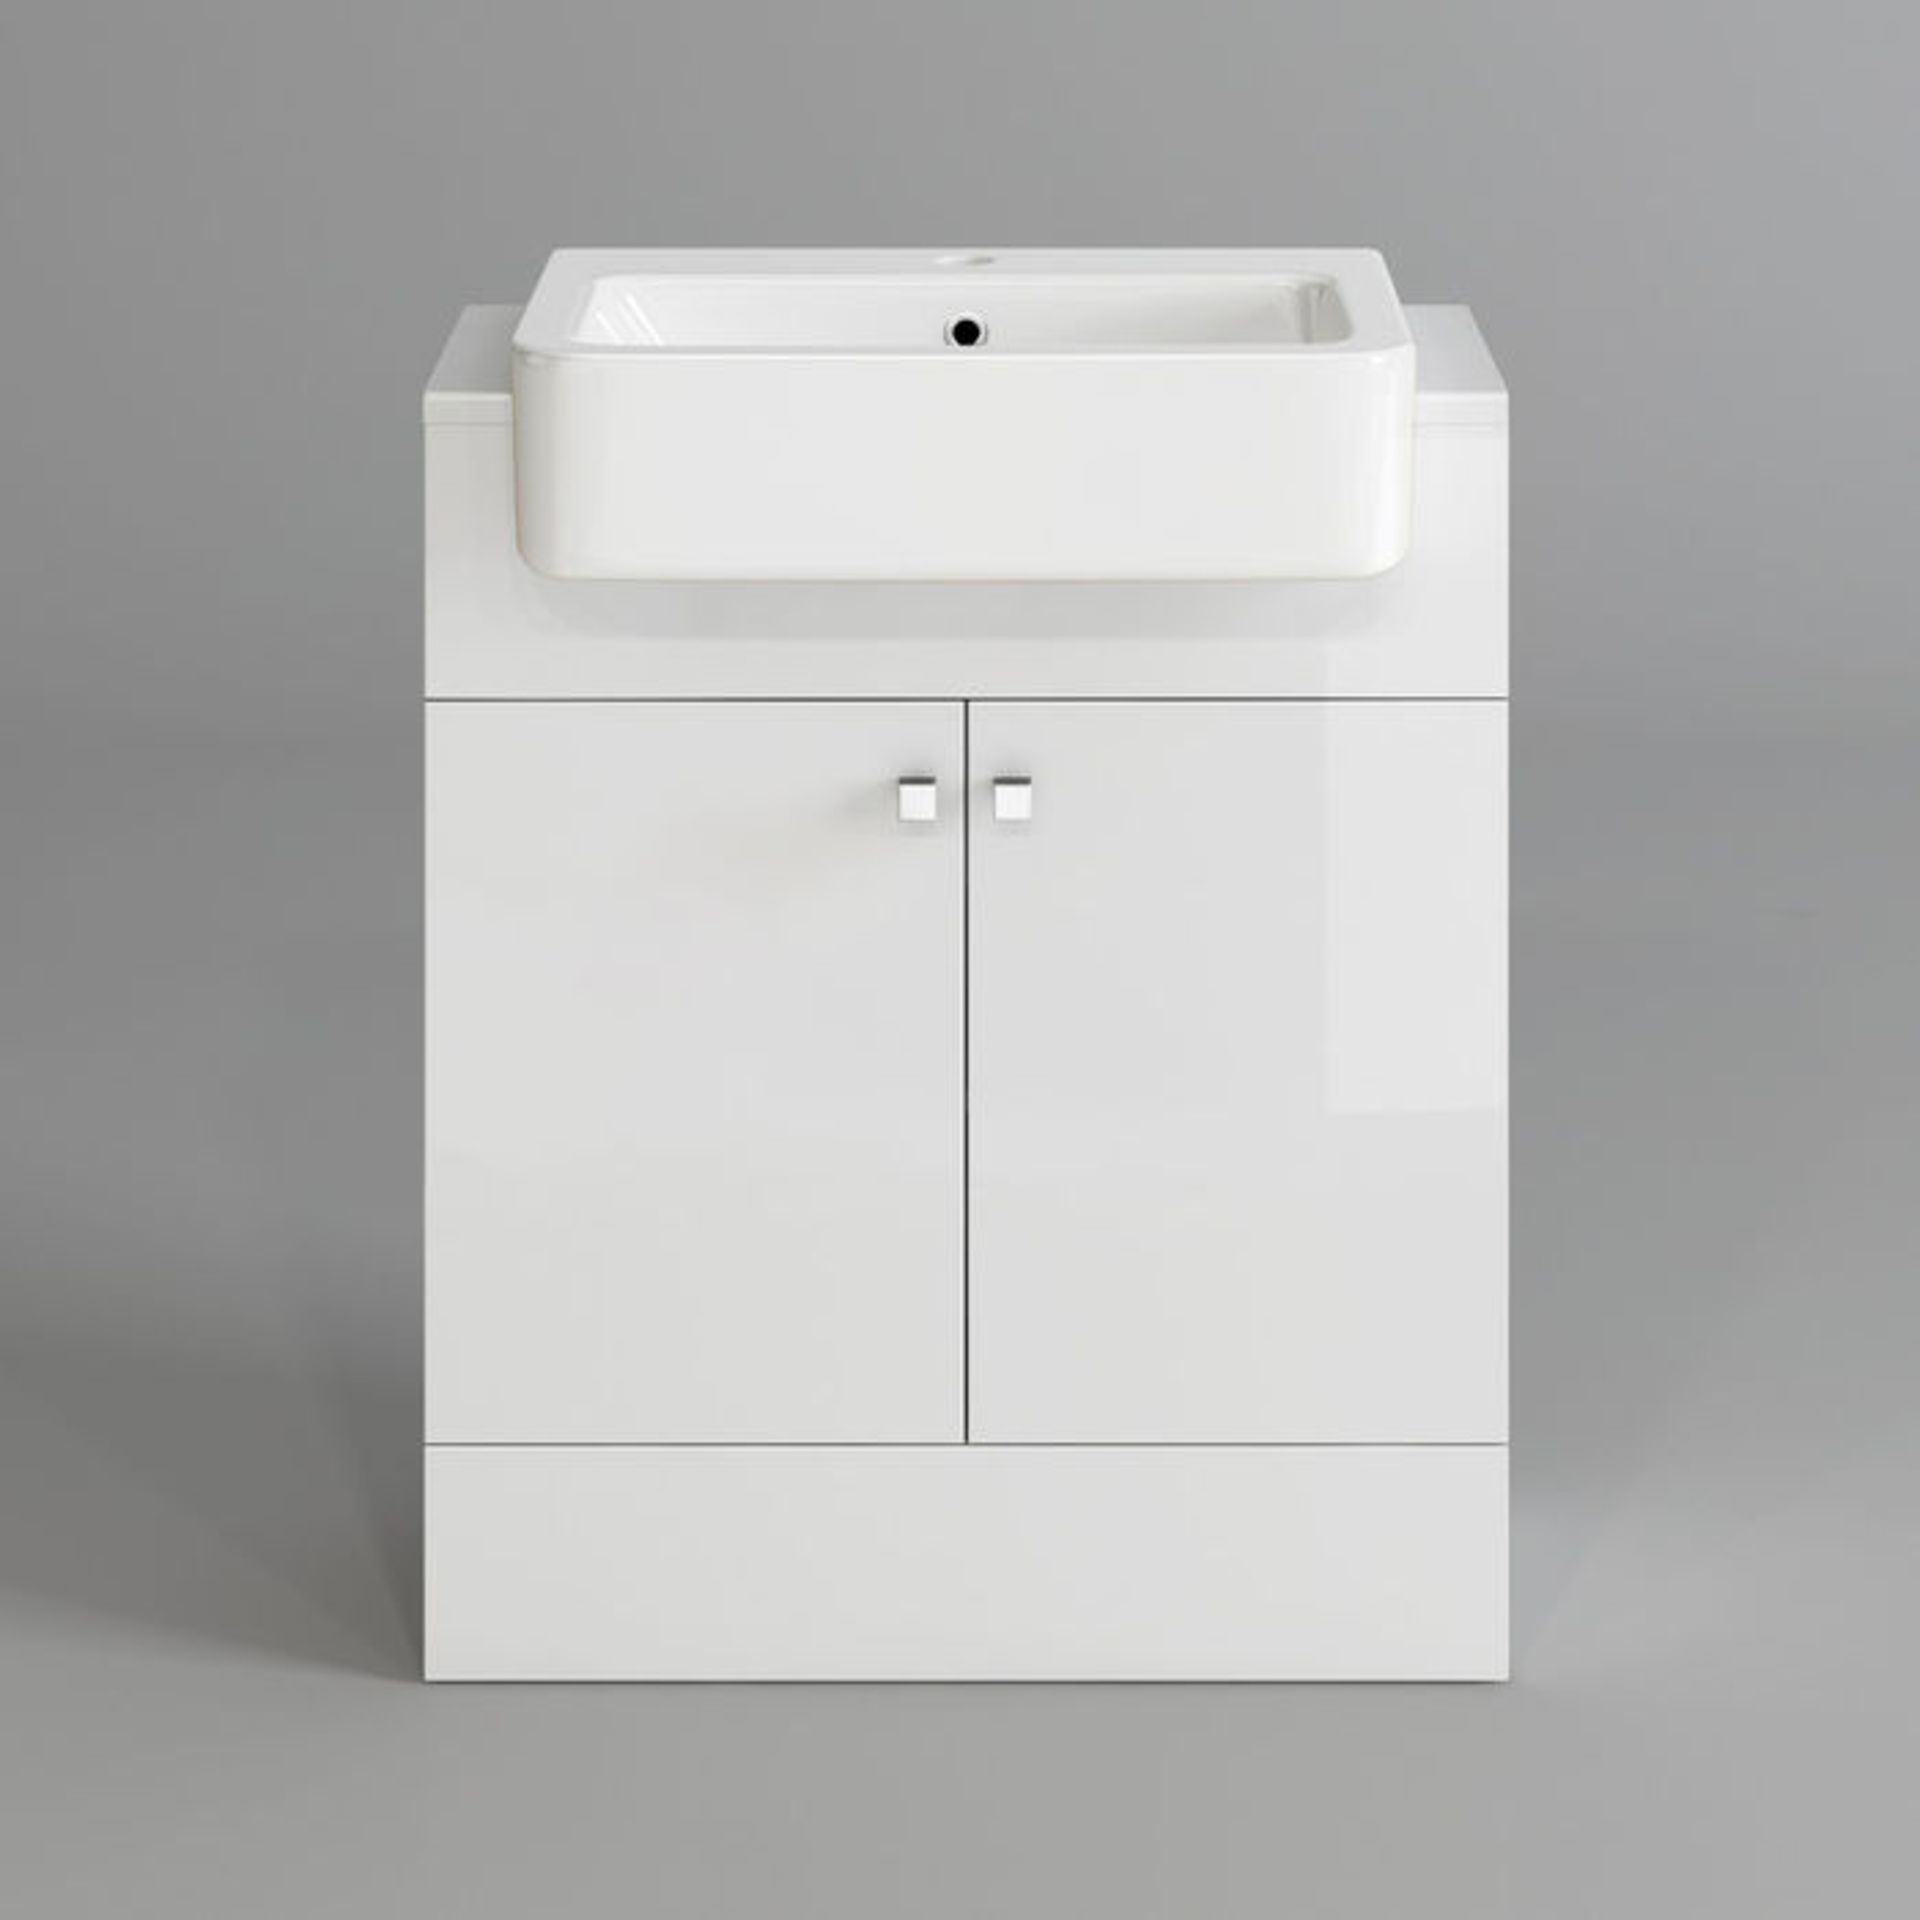 (P272) 660mm Harper Gloss White Basin Vanity Unit - Floor Standing. RRP £499.99. Comes complete with - Image 4 of 4